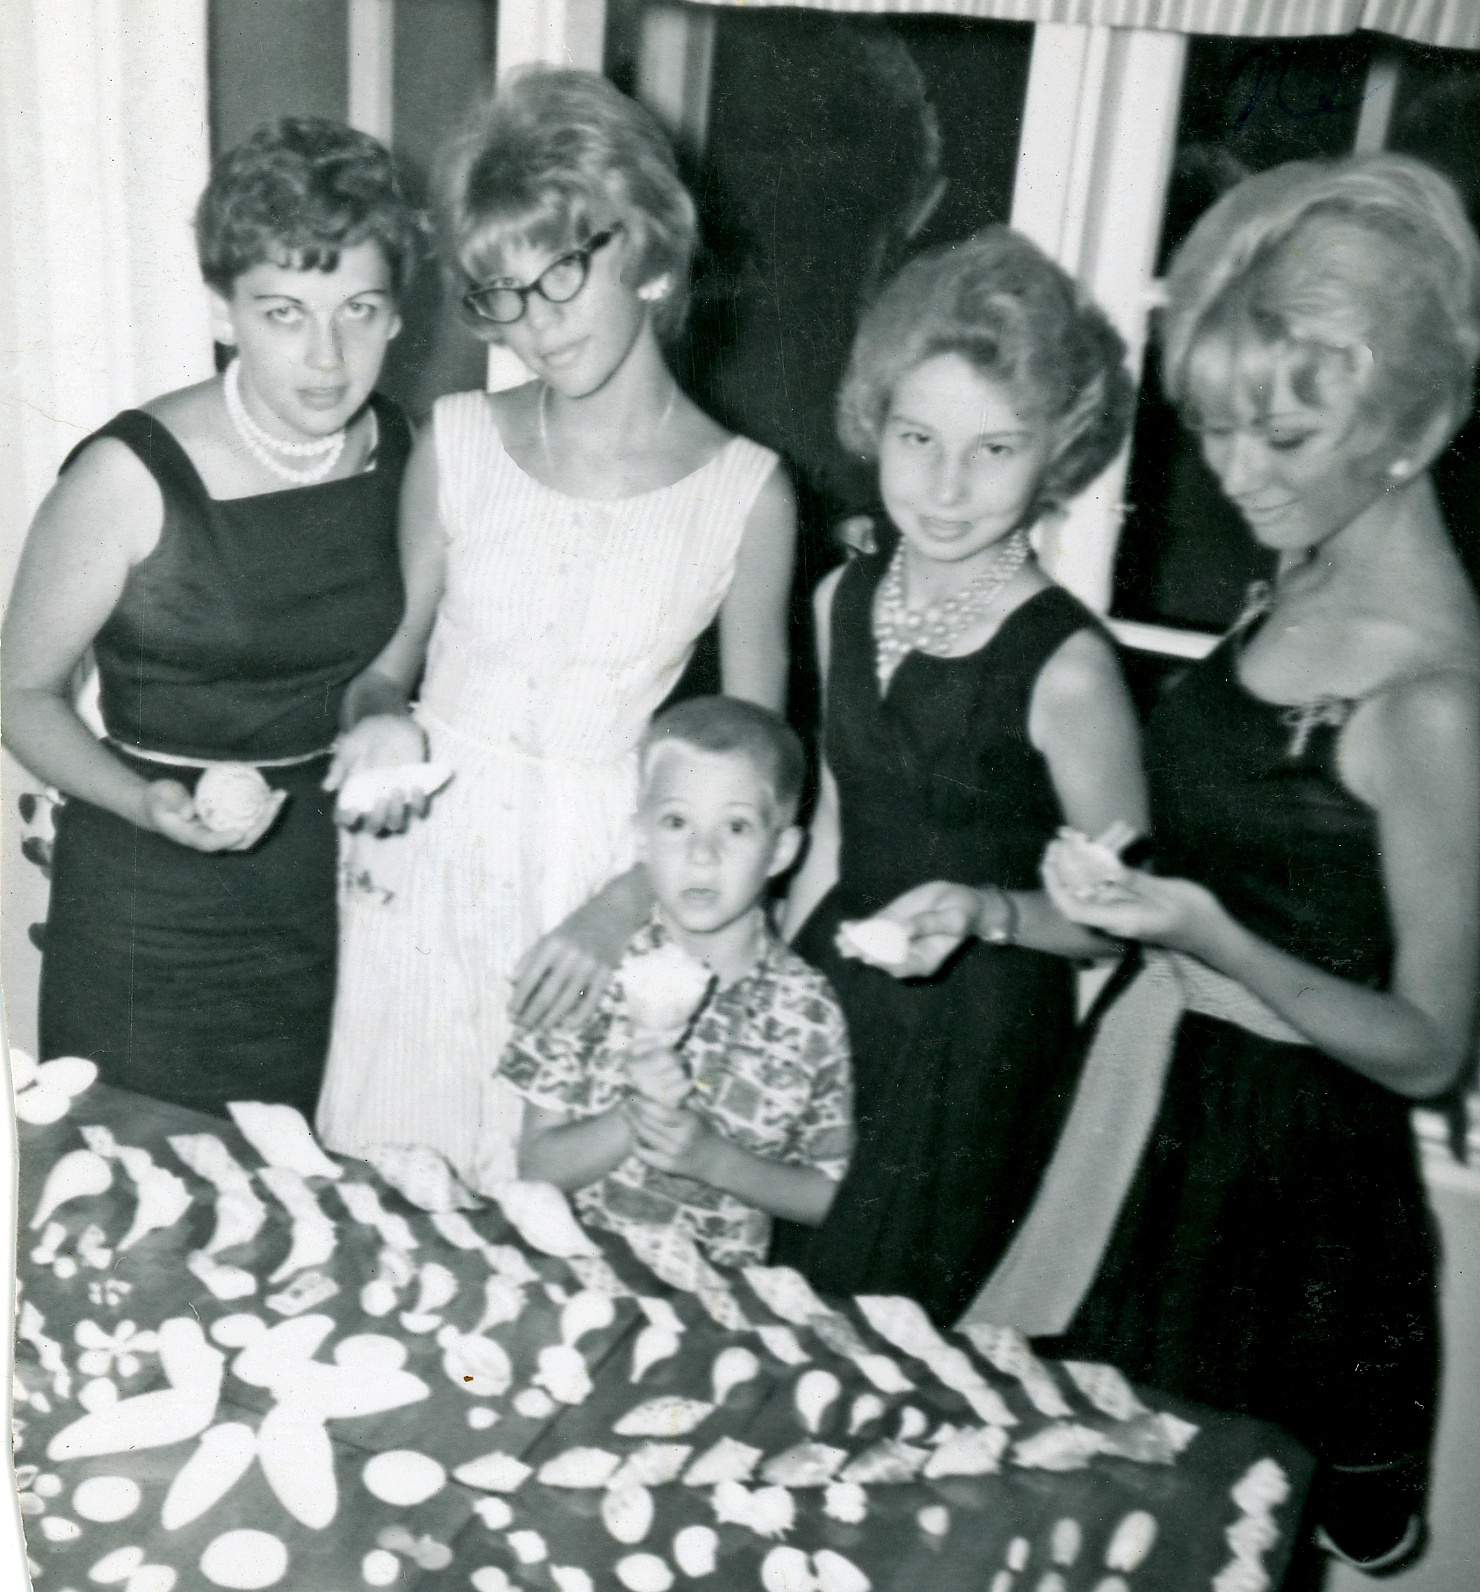 That's Joan on the left with her sisters Tina beside her and Becky on the end. Don't know who the other woman is. The little guy is me. Frankly, I think I'm more properly outfitted for displaying shells than the lovely ladies.